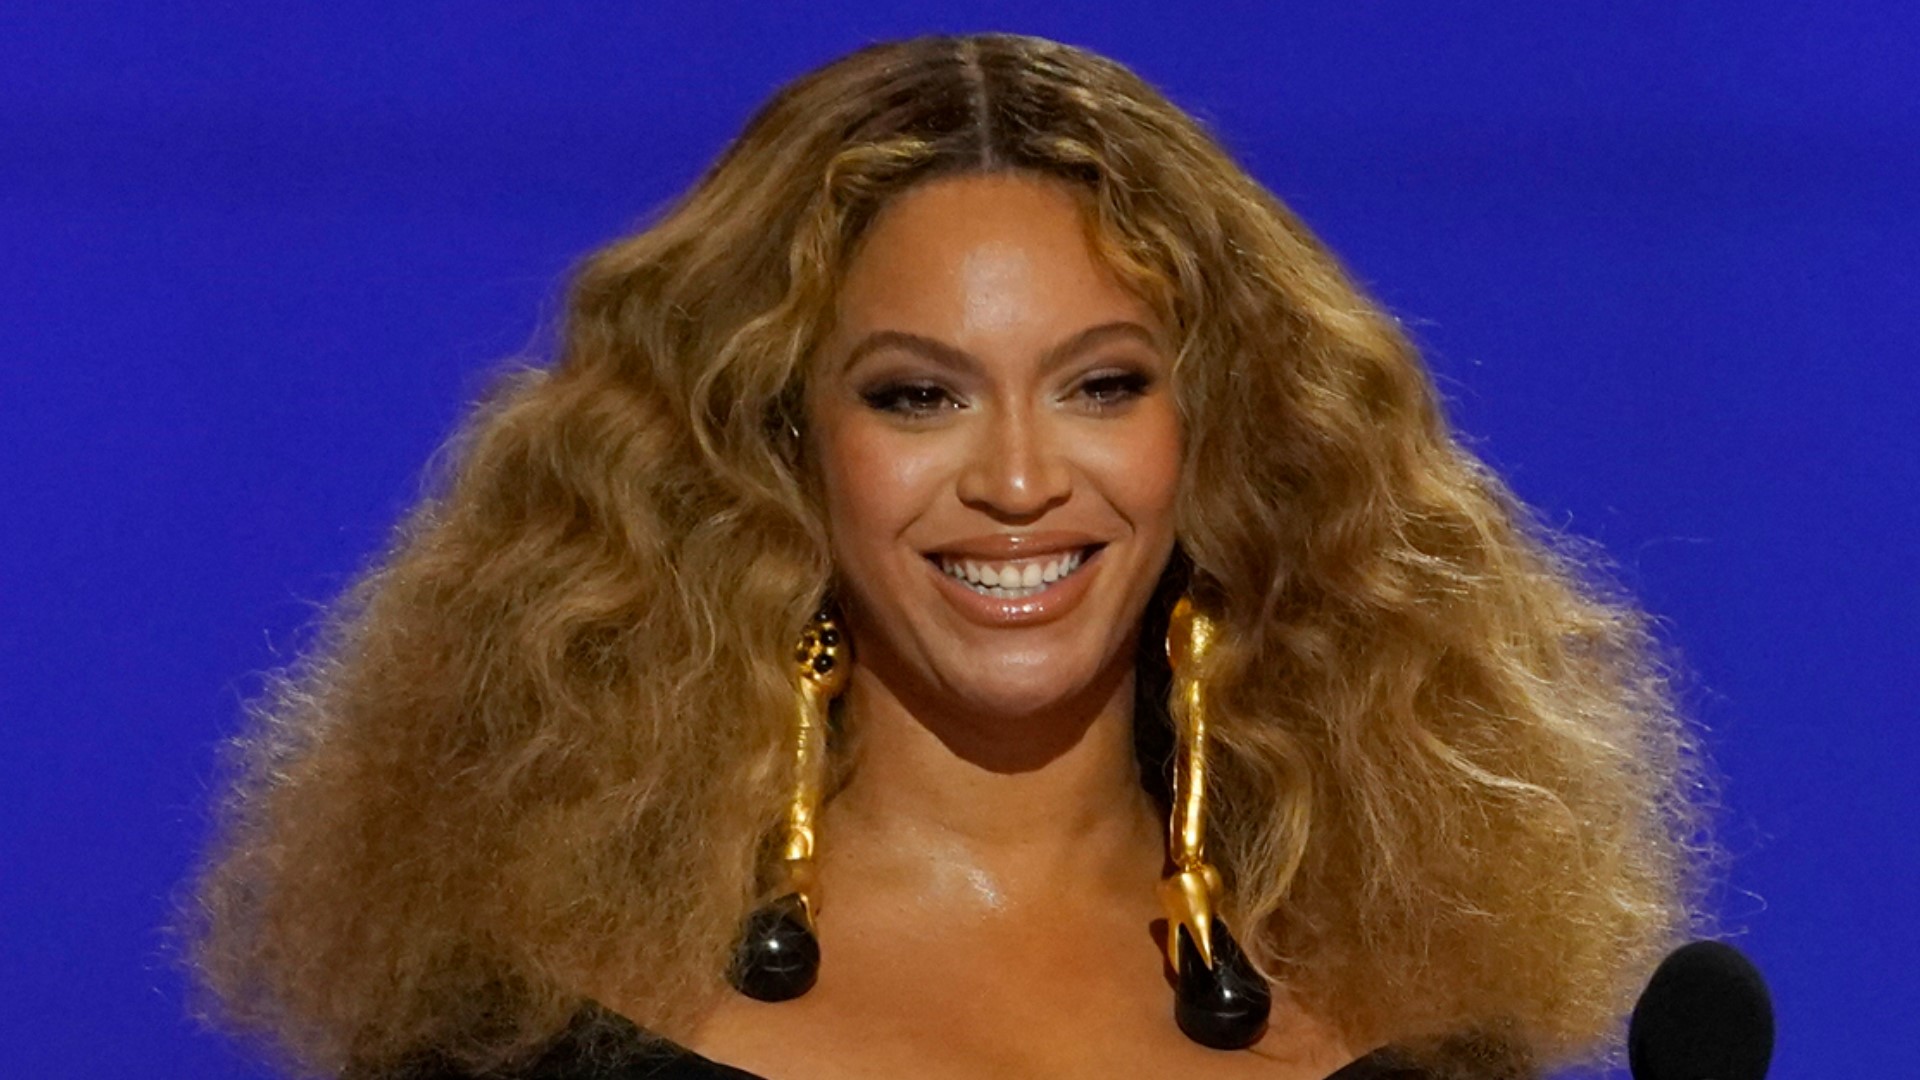 "Texas Hold 'Em" wasn't the only Beyoncé song to land a spot on the country chart.